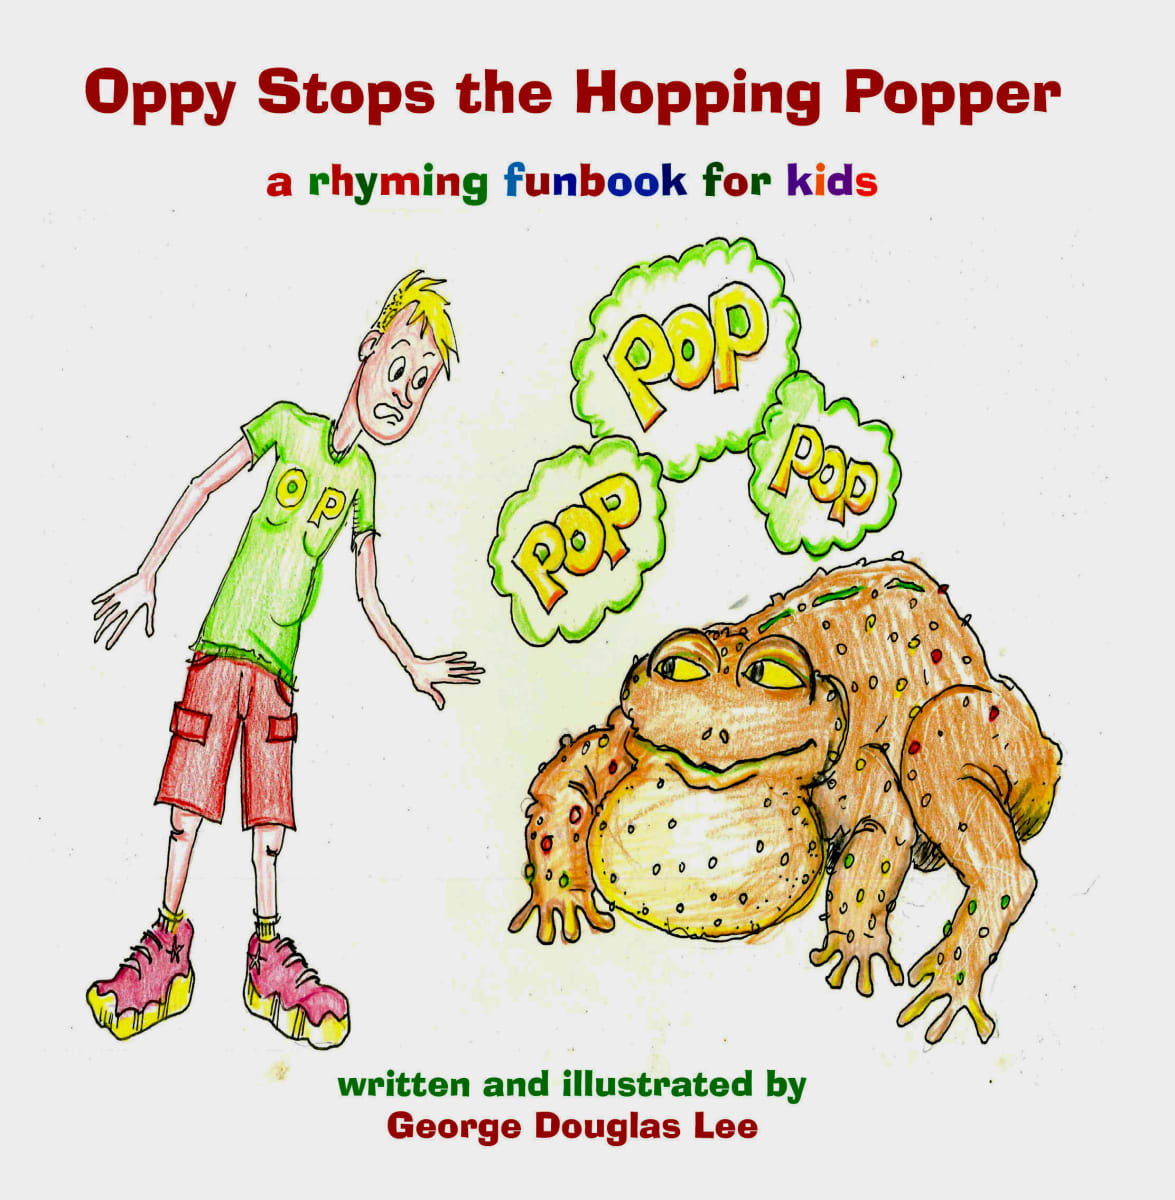 Oppy Stops the Hoping Popper Book by George Douglas Lee  Image: A Rhyming Fun Book for Kids